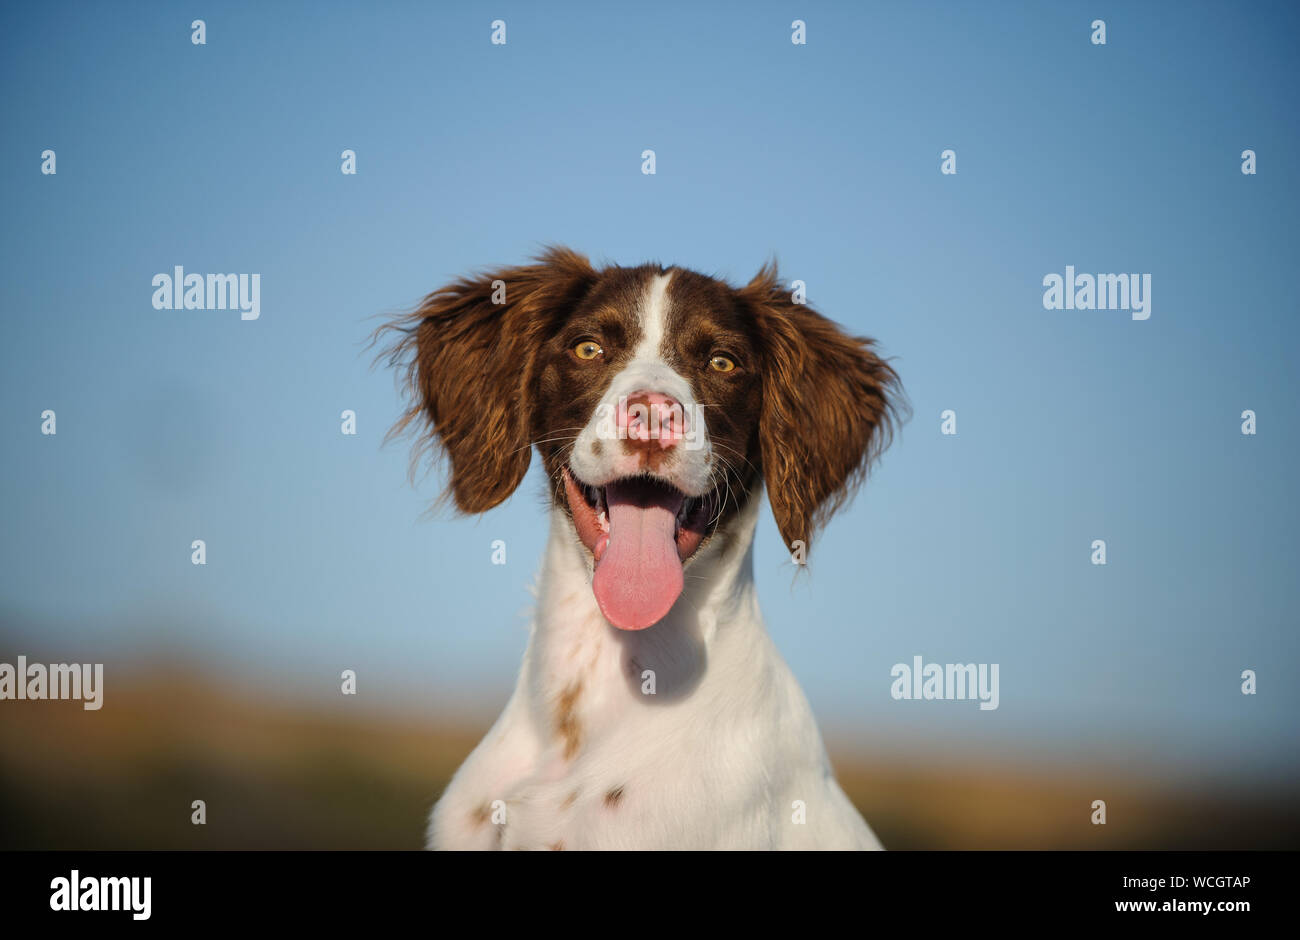 Close-up Portrait Of Dog Sticking Out Tongue Against Clear Sky Stock Photo